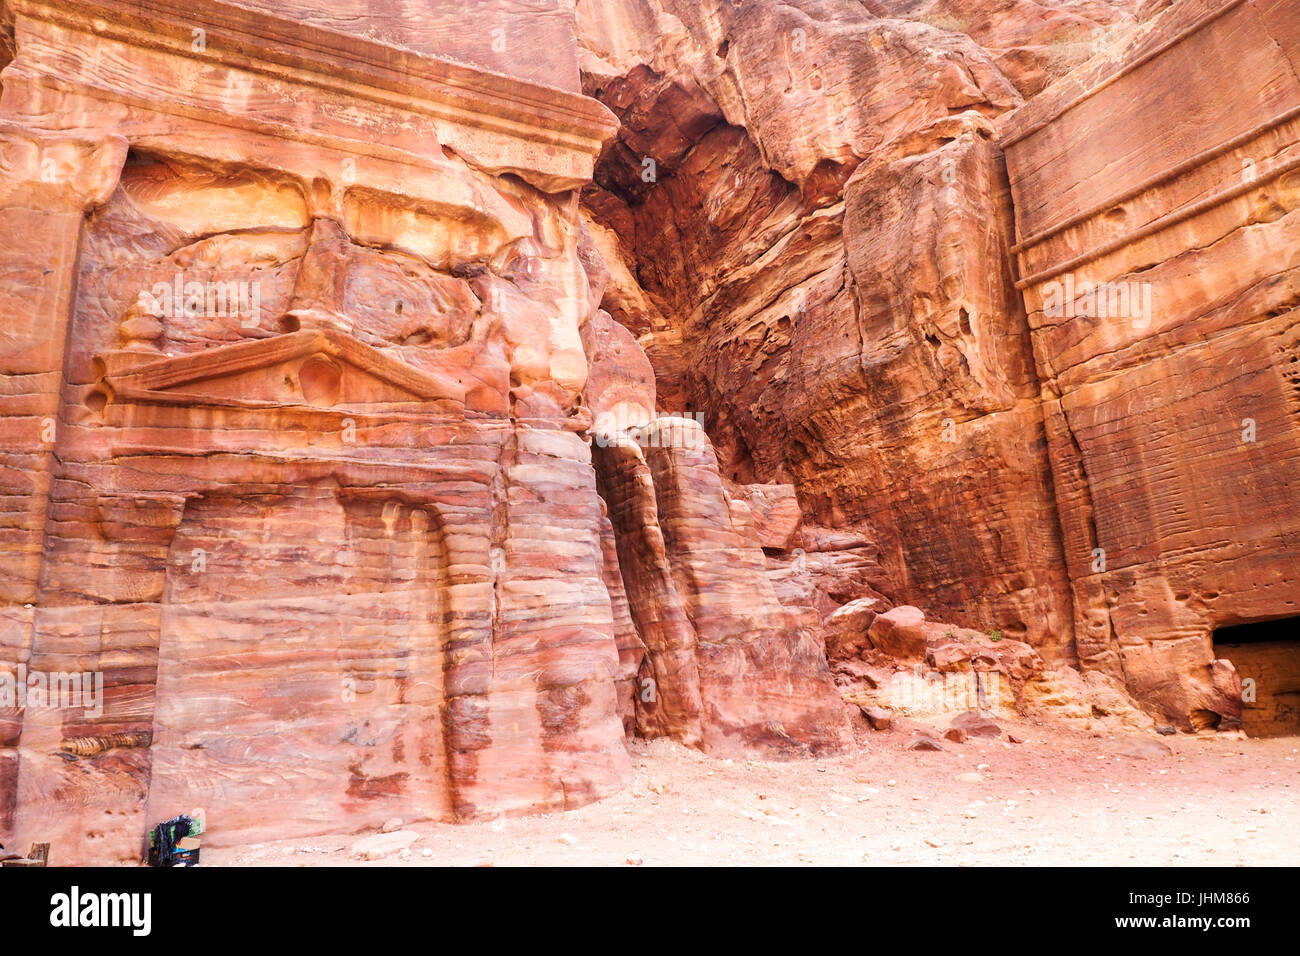 Ancient Nabataean ruins carved into the cliffs of Petra, Jordan. Stock Photo